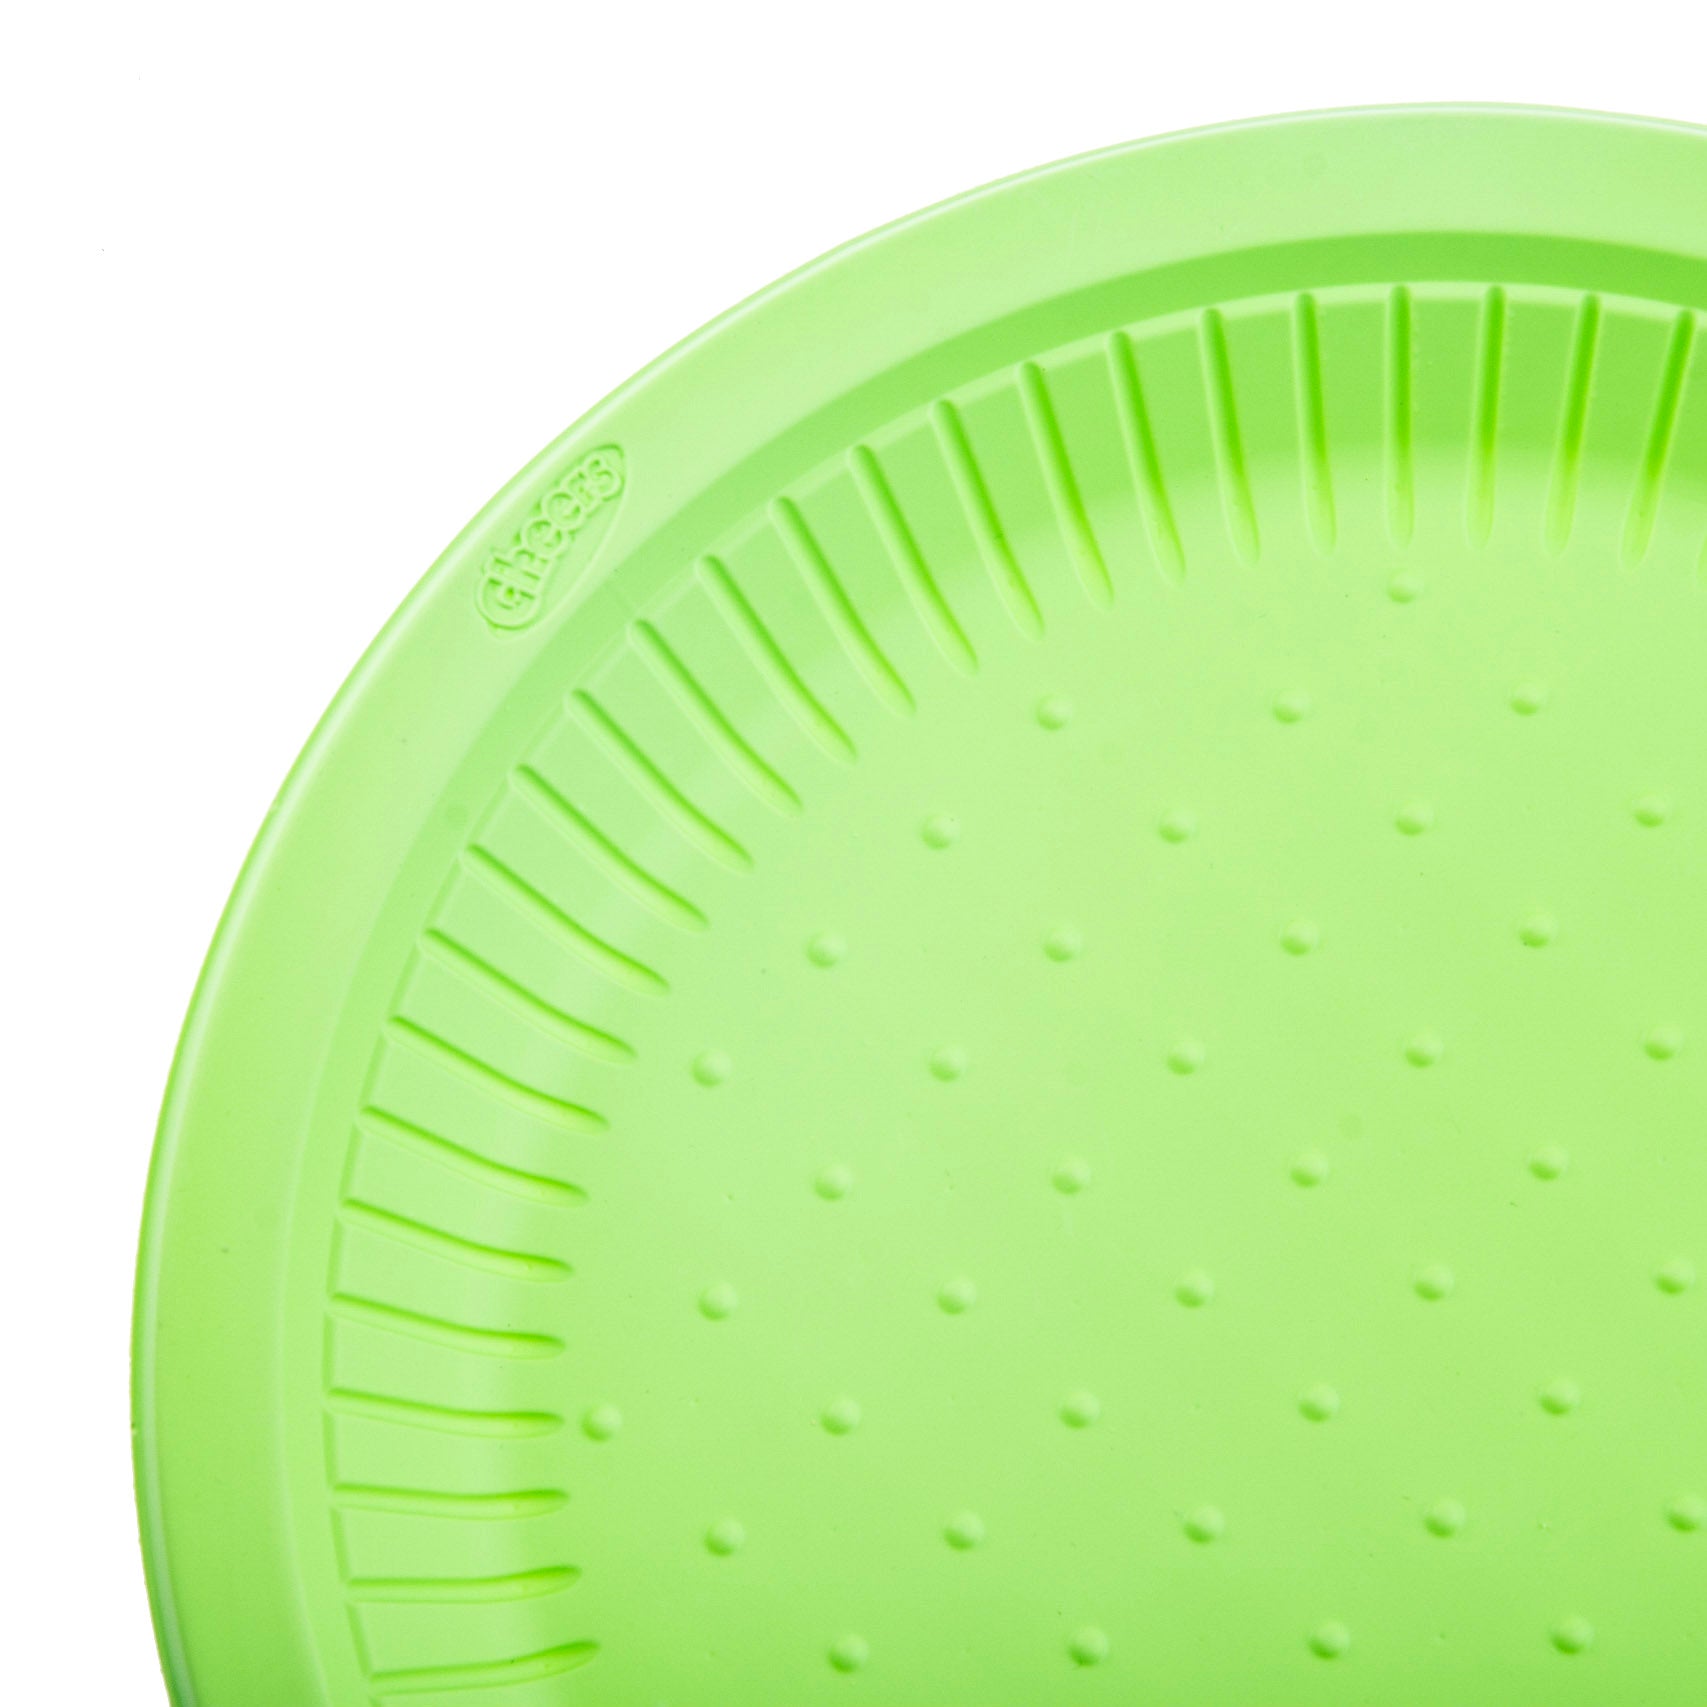 Cheers Starch-Based Plates 6 Pieces - Green Color (1 Pack) TPH